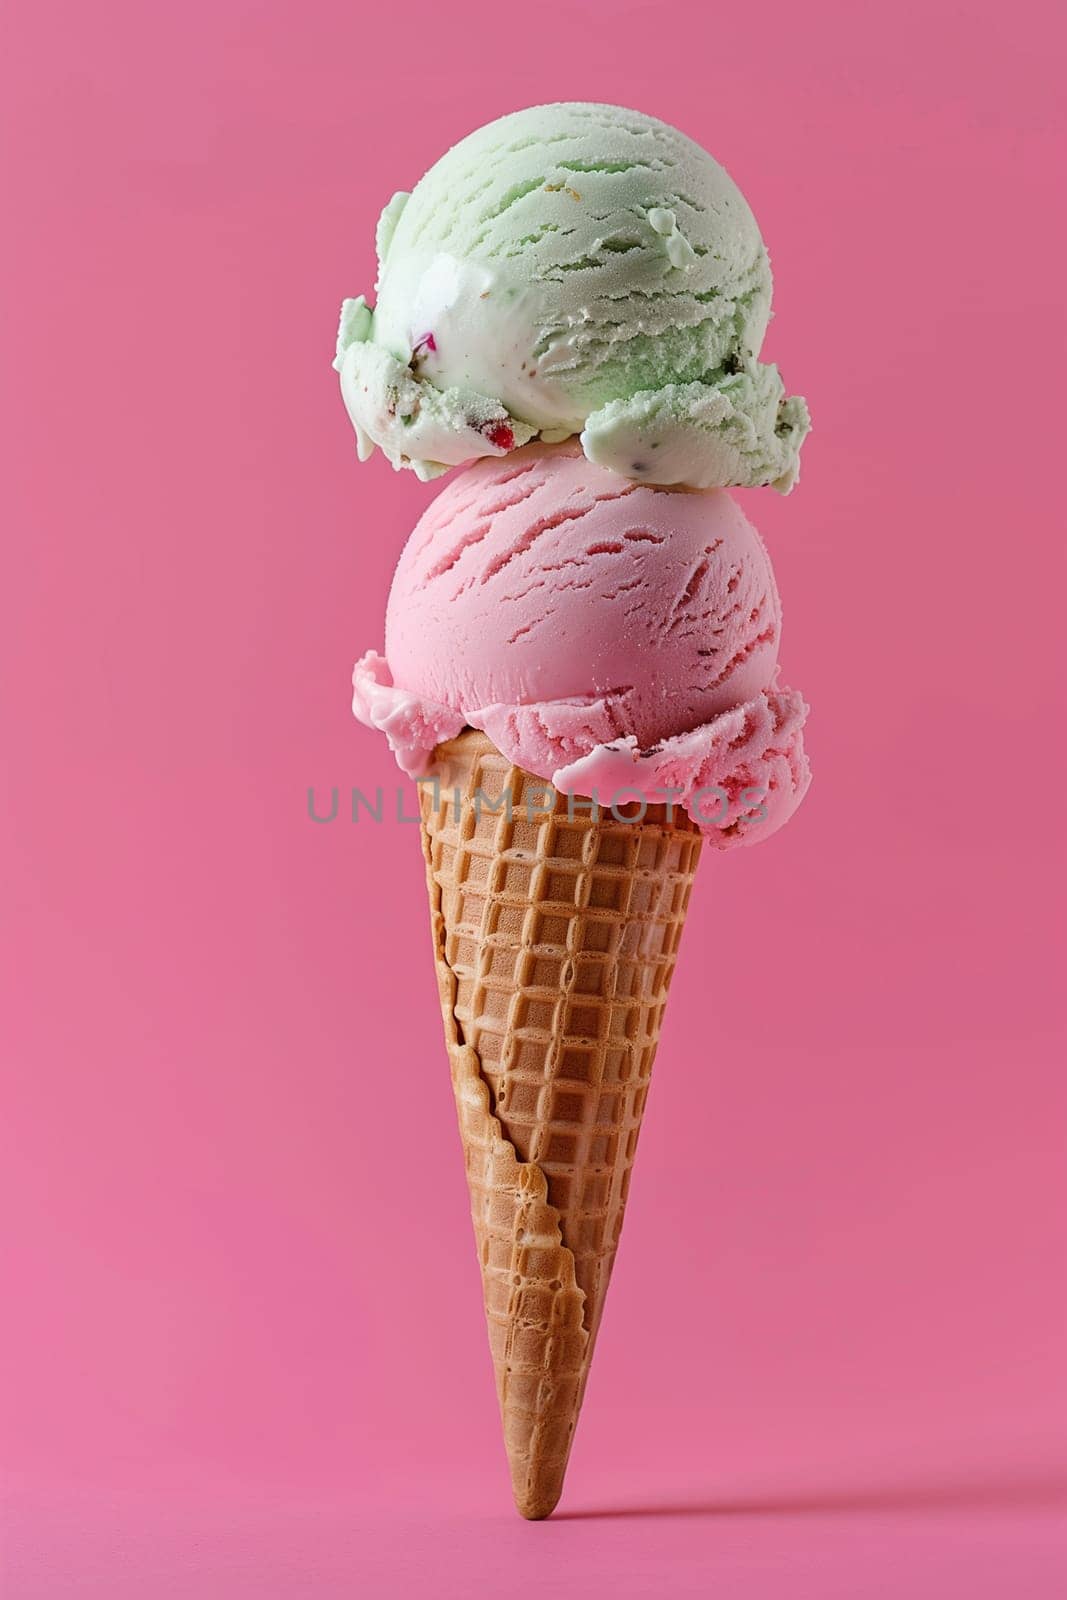 Two scoops of creamy ice cream sit on a vibrant pink background, creating a visually appealing dessert composition.